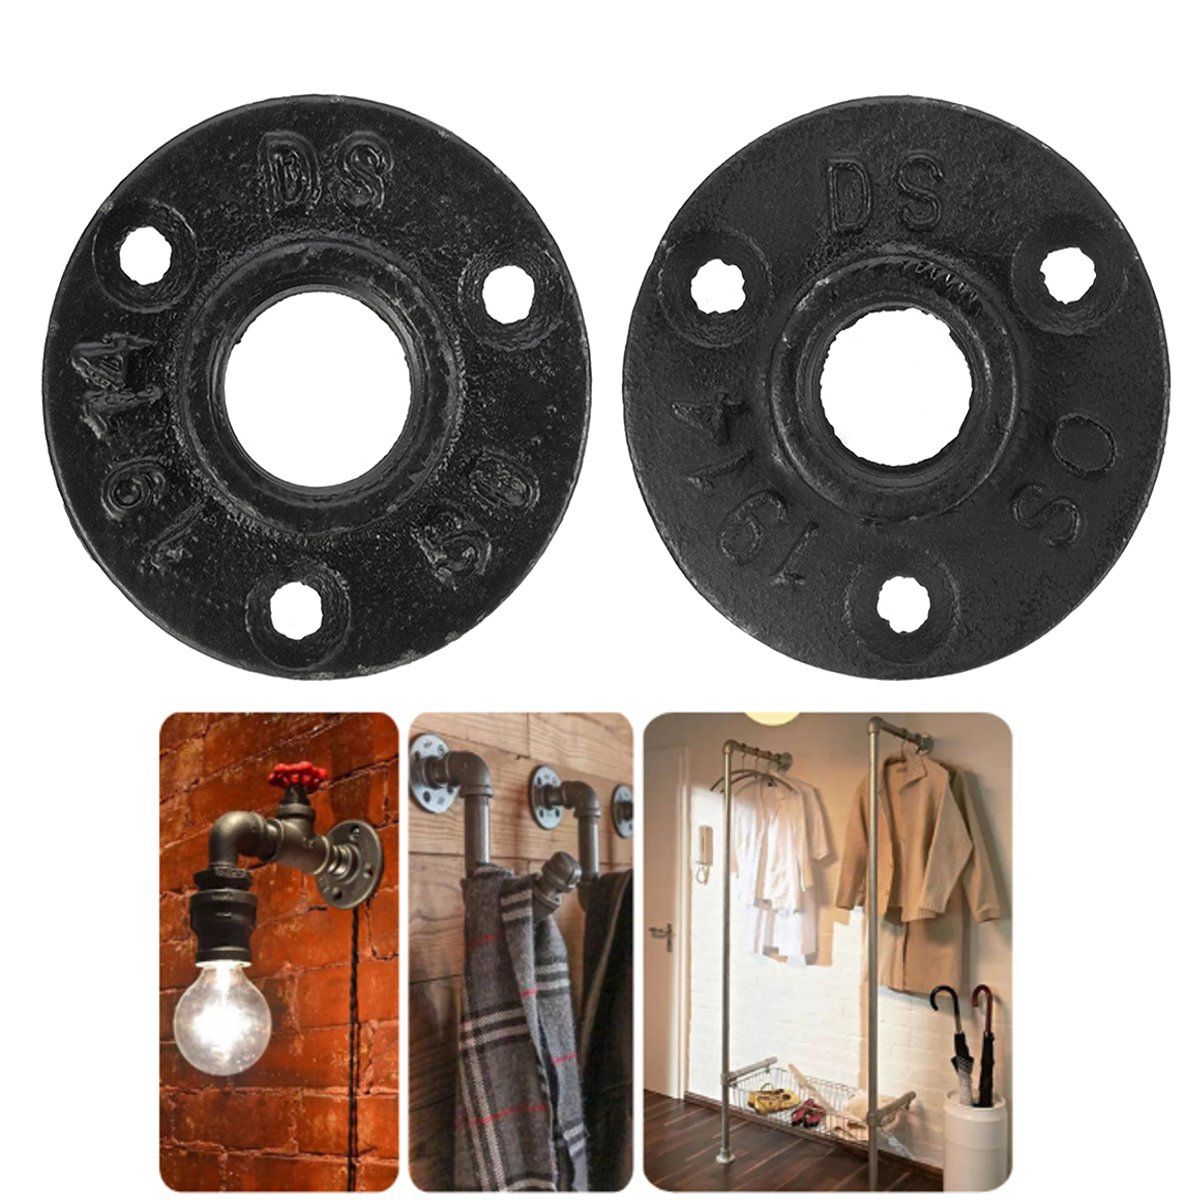 12-34-Inch-Decorative-Flange-Malleable-Iron-Floor-Wall-Flange-Pipes-Plate-Fittings-1325052